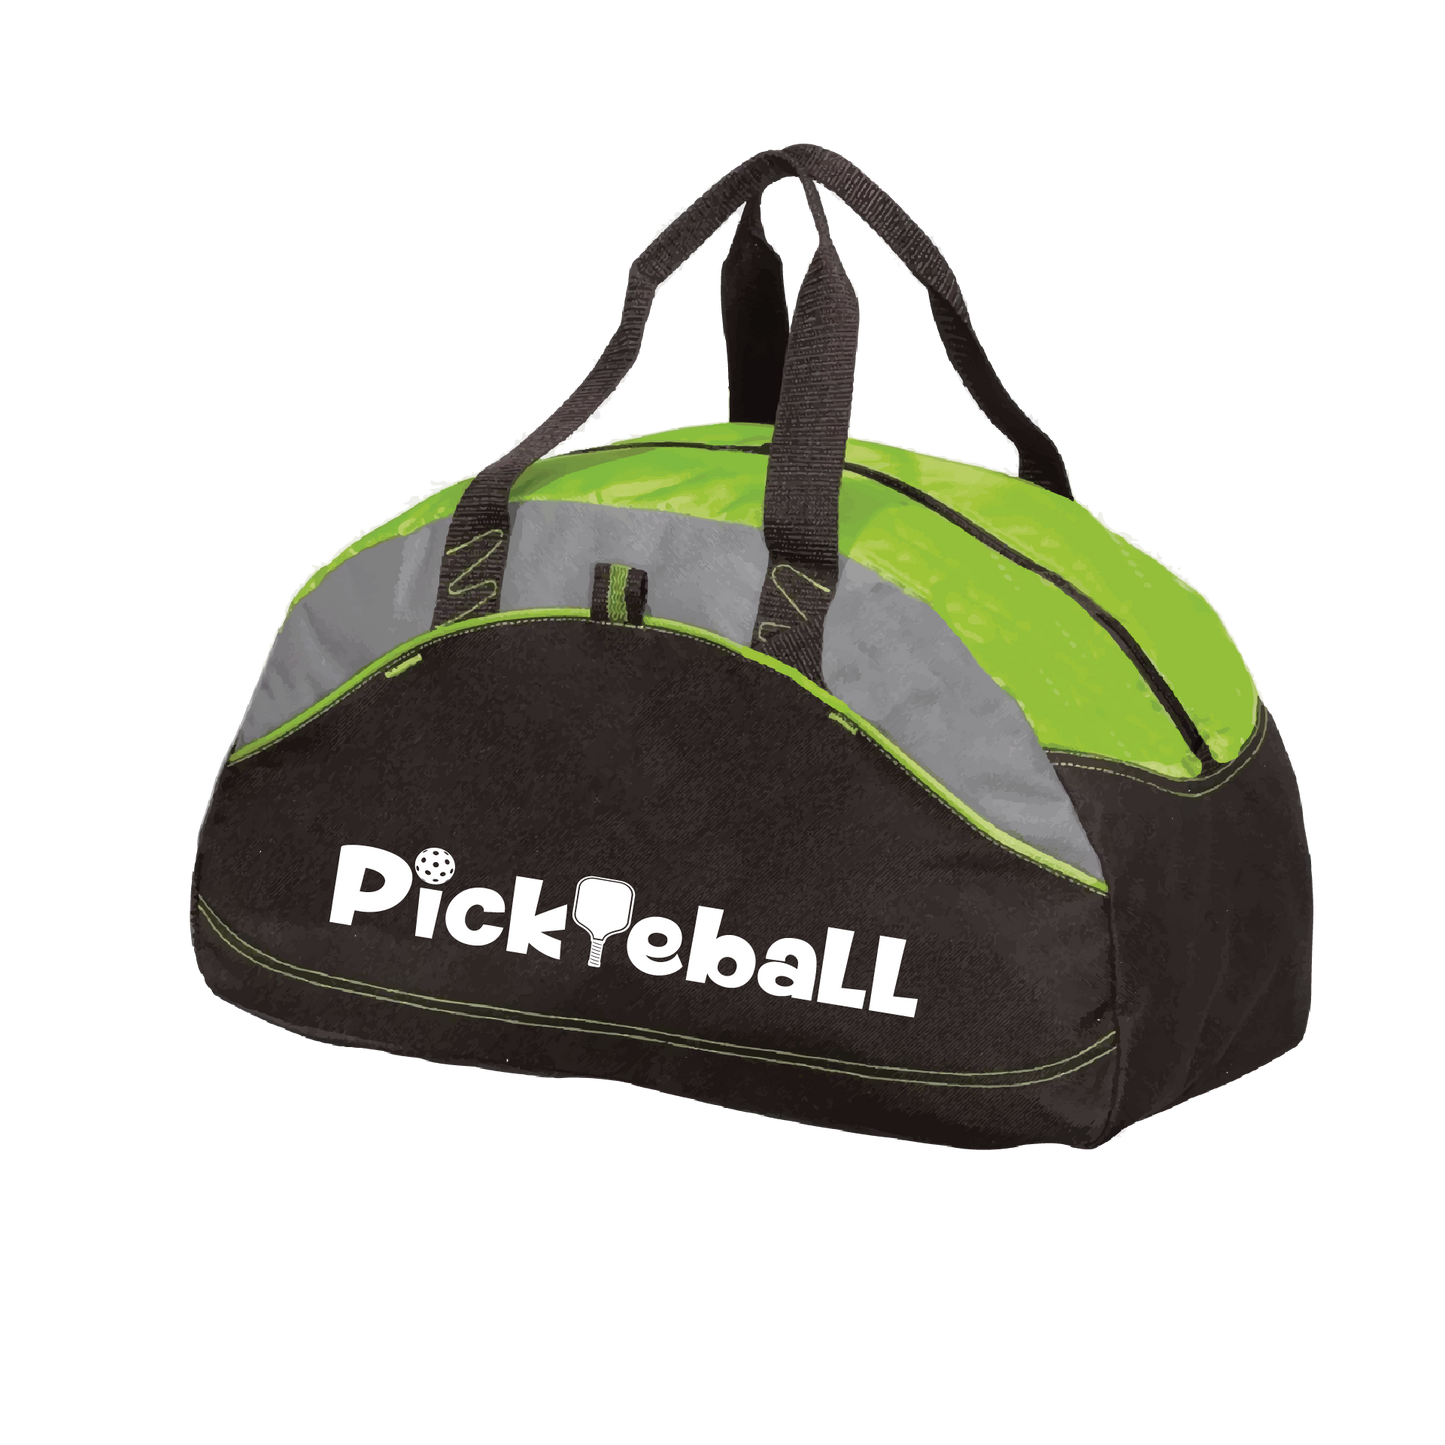 Pickleball Design: Pickleball  Carry your gear in comfort and style. This fun pickleball duffel bag is the perfect accessory for all pickleball players needing to keep their gear in one place. This medium sized duffel tote is ideal for all your pickleball activities. The large center compartment allows for plenty of space and the mesh end pocket is perfect for holding a water bottle.